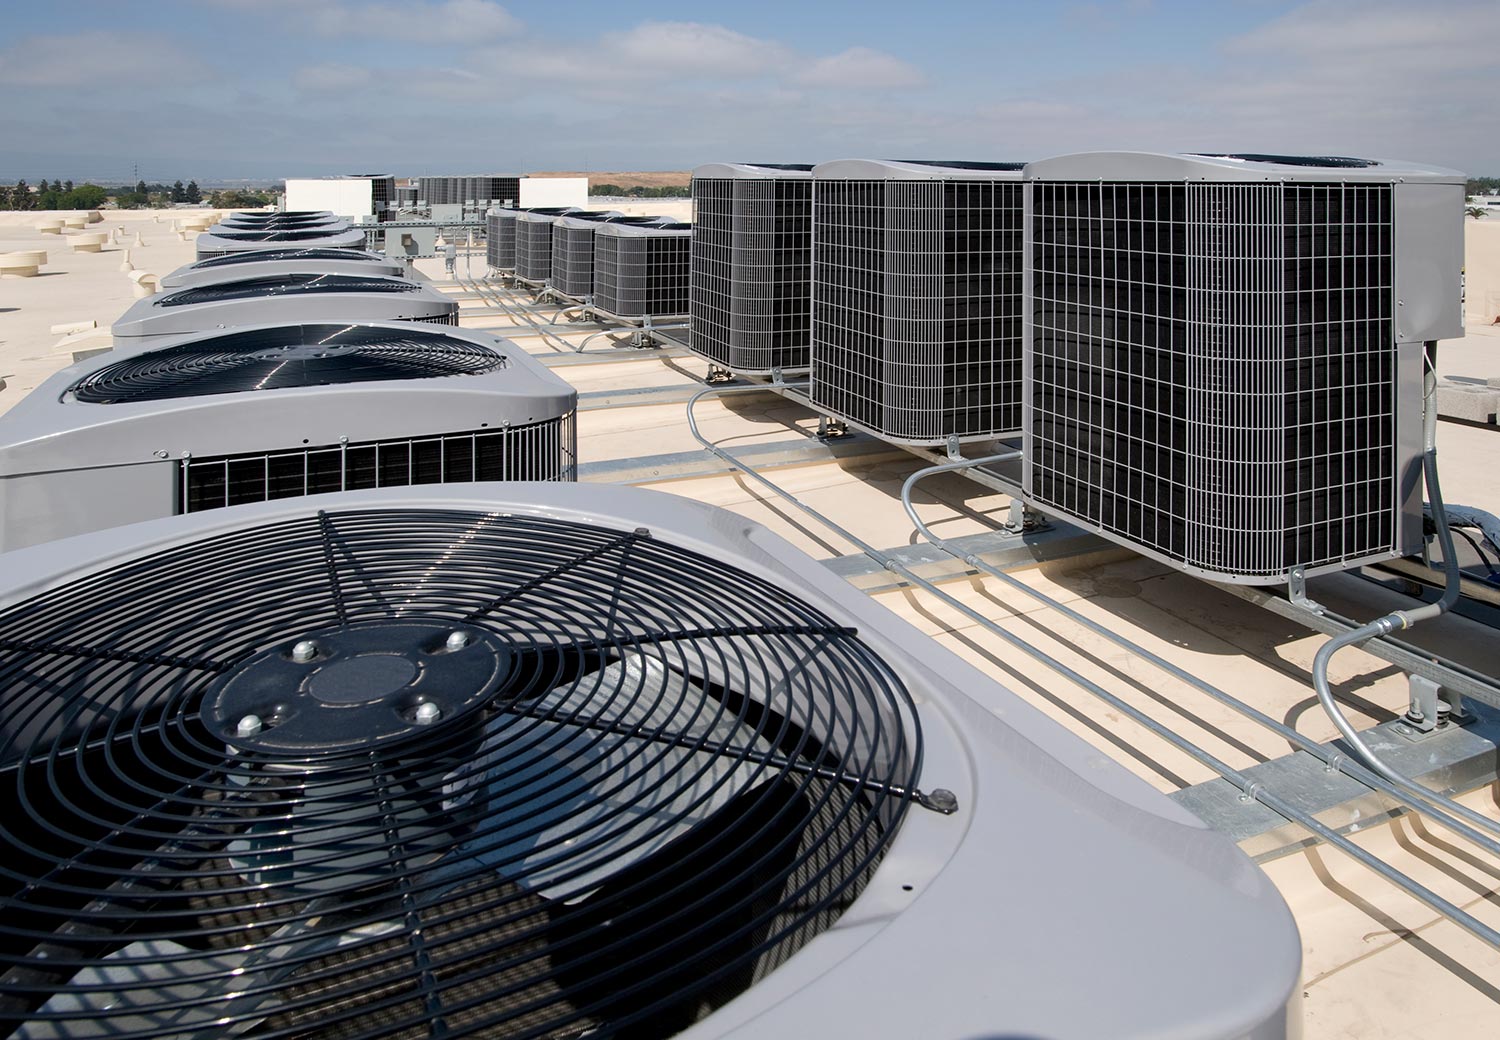 Air conditioning condensers on the roof of a large building